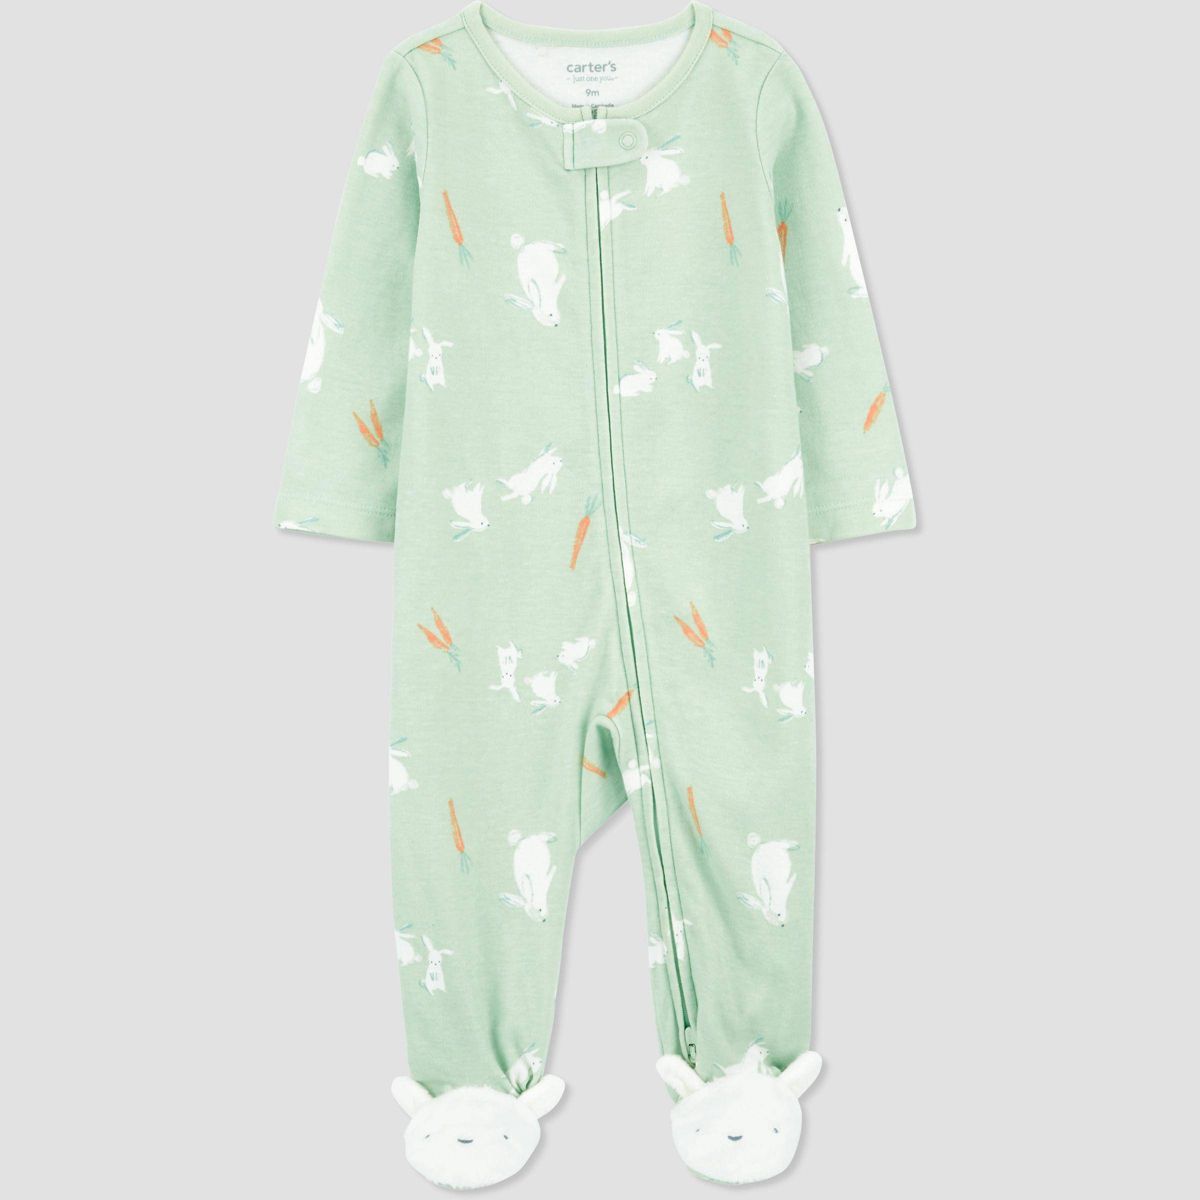 Carter's Just One You® Baby Bunny Footed Pajama - Green/White | Target